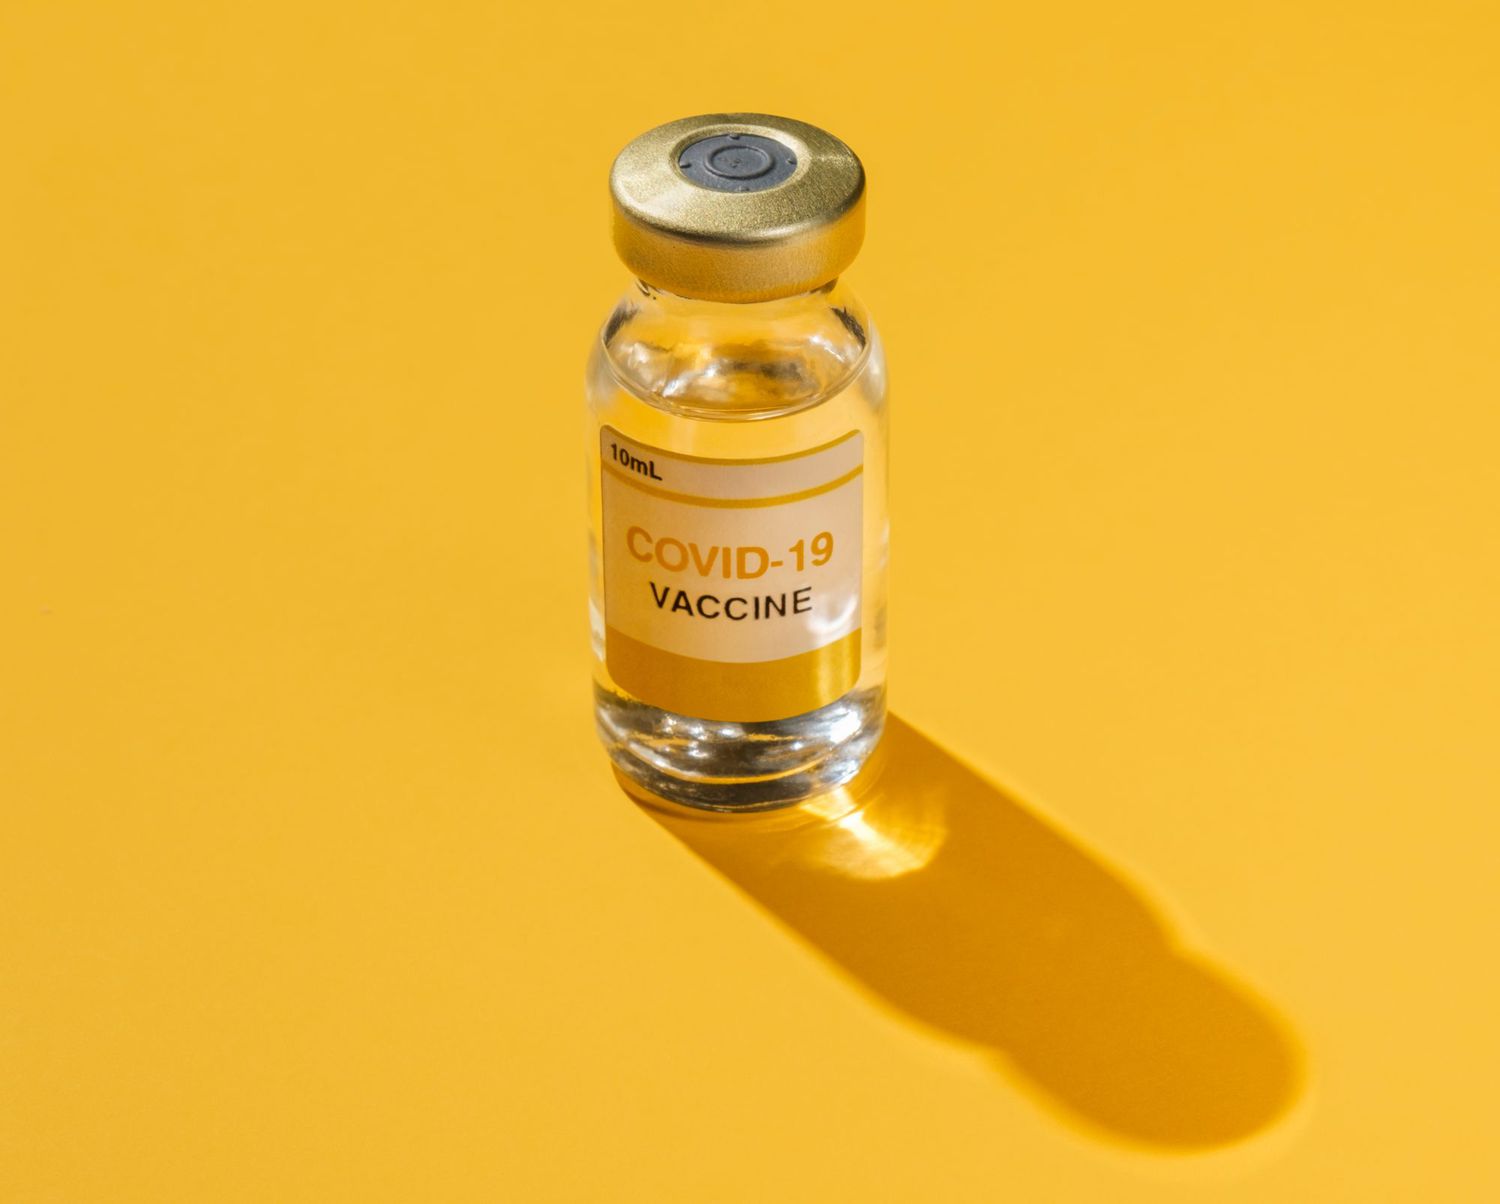 An image of a mock up of the COVID-19 vaccine.